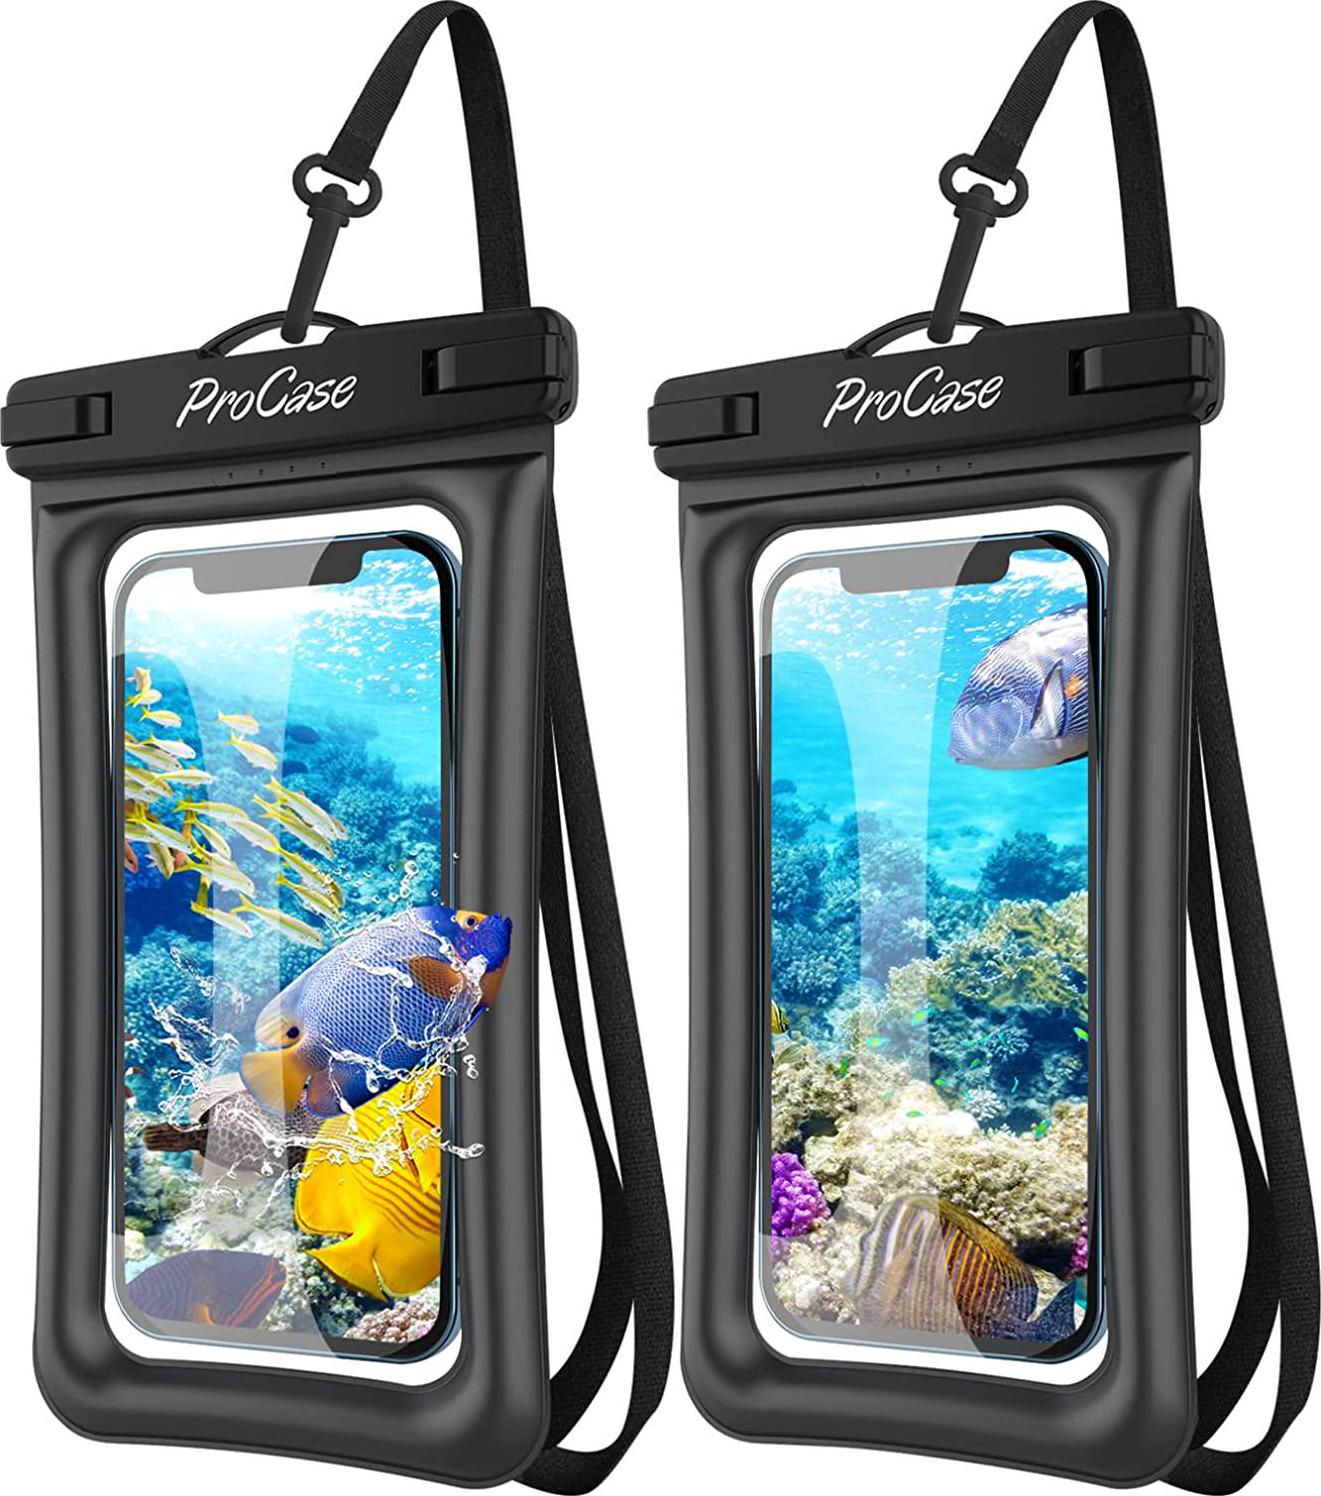 Procase, ProCase Floating Waterproof Phone Pouch, Universal Float Underwater Dry Bag Case for iPhone 13 Pro Max/ 12 Pro Max 11 XS XR 8 7 Plus Galaxy Pixel up to 7.0 for Beach Swimming -2 Pack, Black